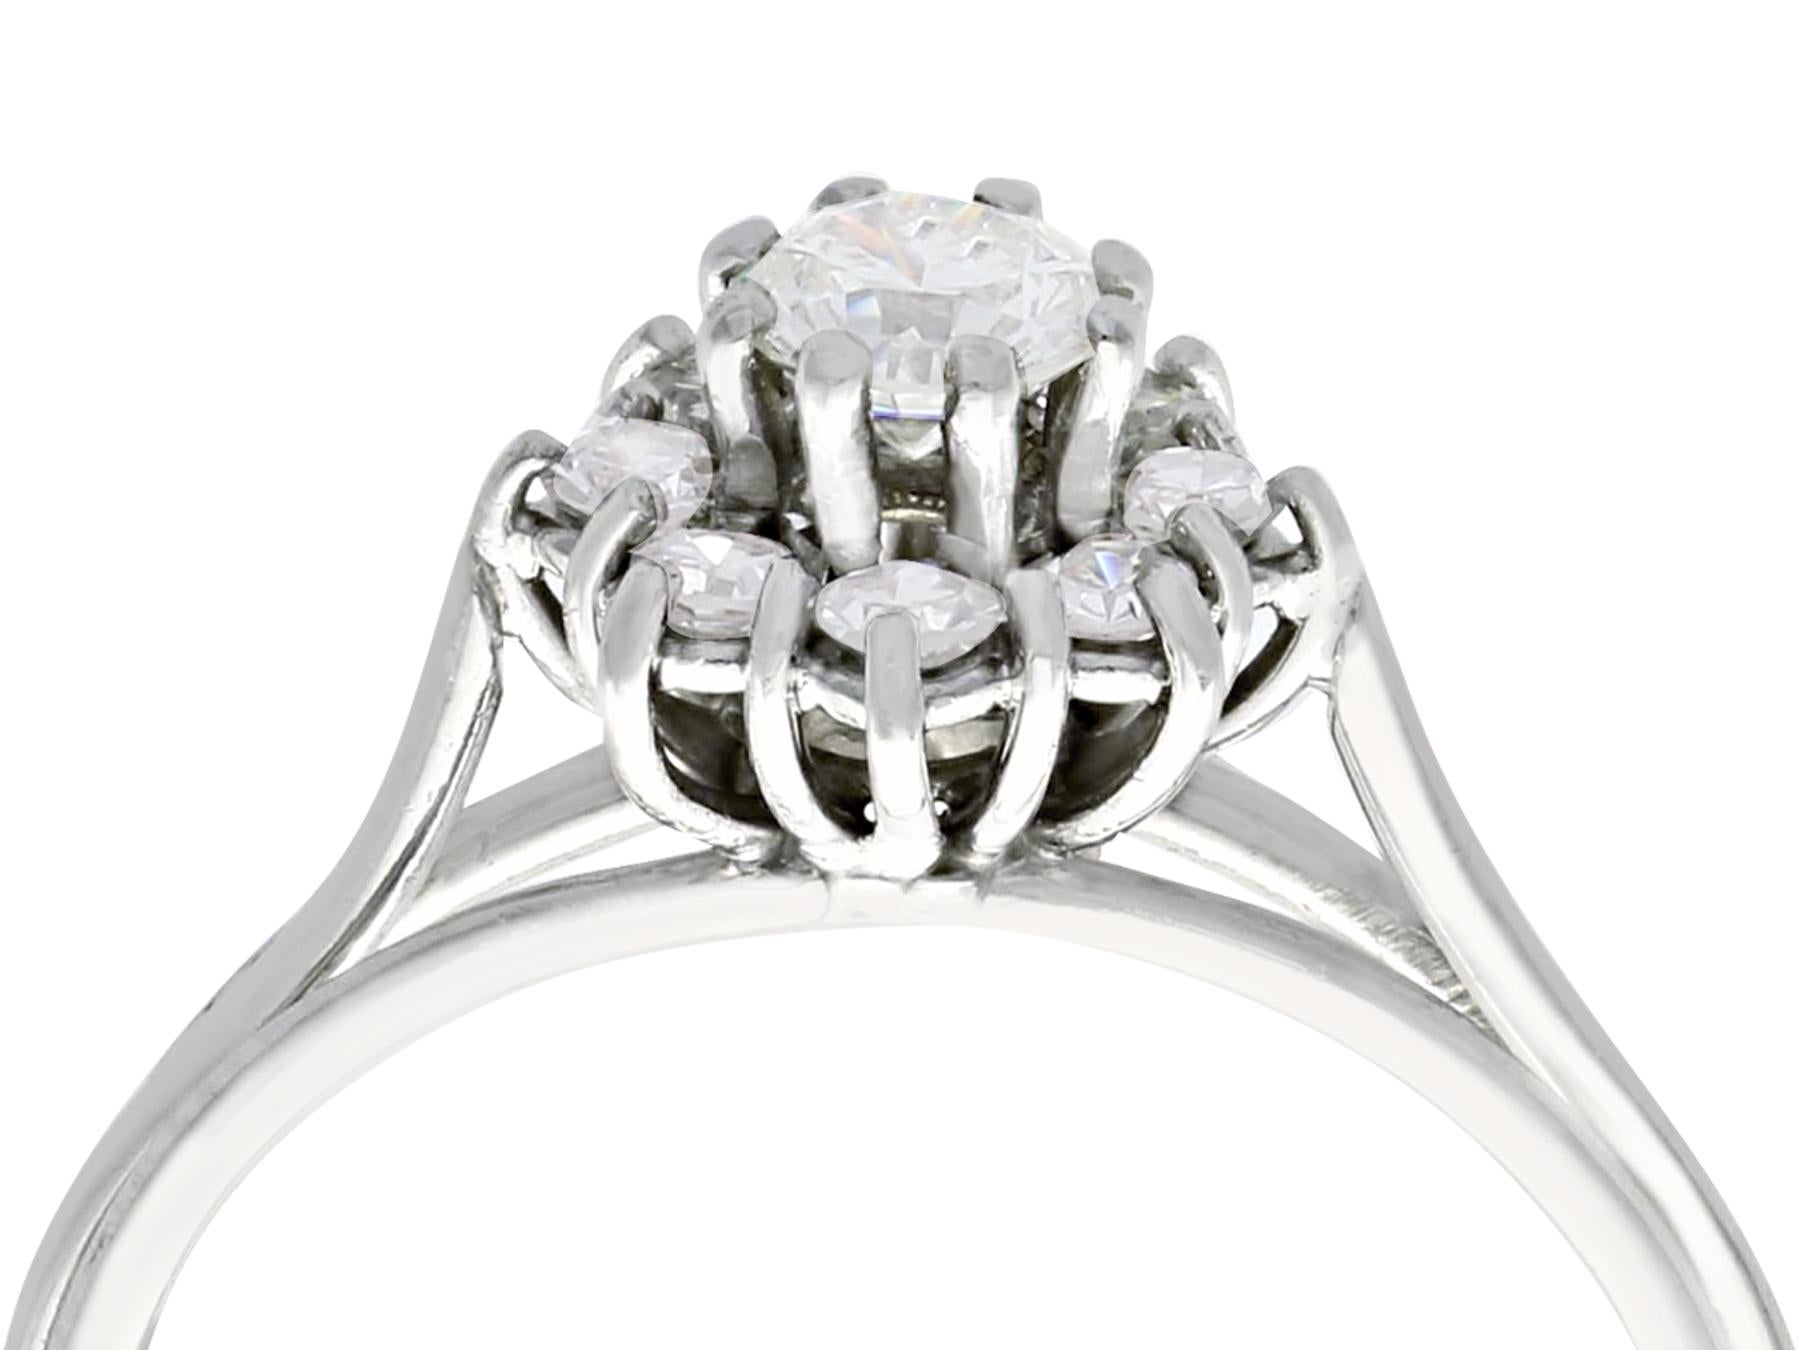 A fine and impressive 0.65 Carat diamond and 18 karat white gold cluster style dress ring; part of our diverse vintage jewelry and estate jewelry collections.

This fine and impressive vintage diamond cluster ring has been crafted in 18k white